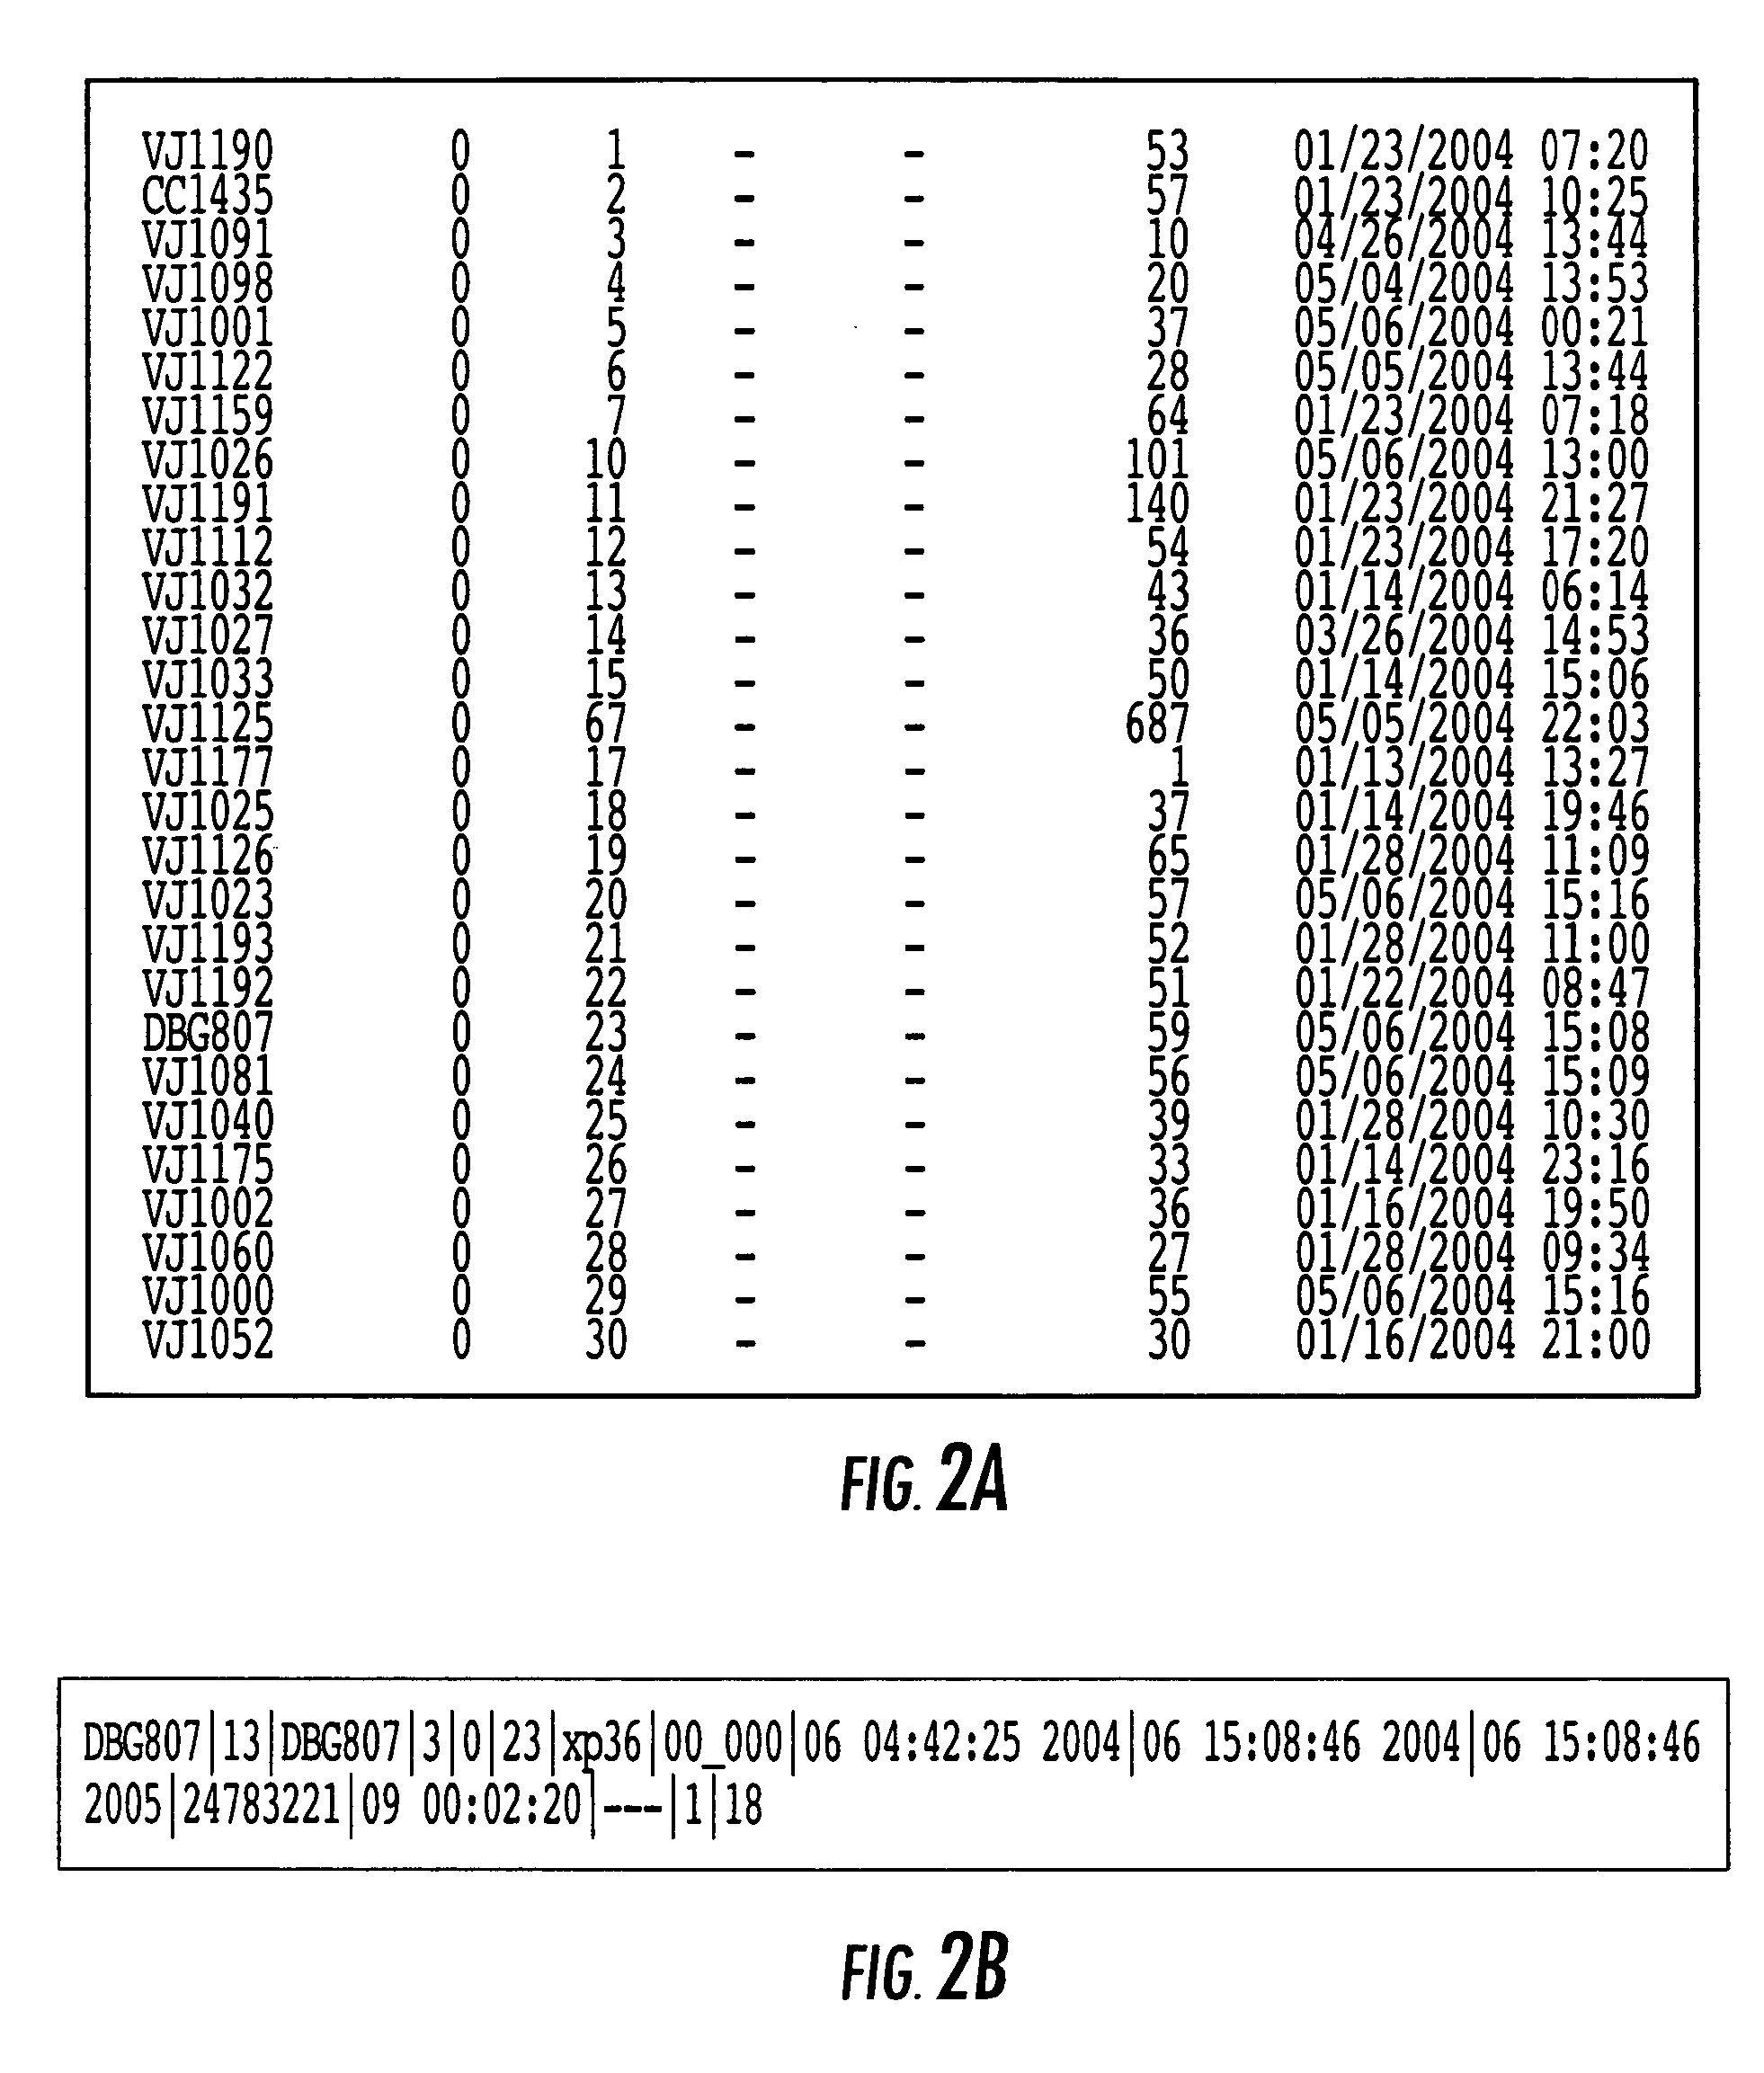 Agent-less systems, methods and computer program products for managing a plurality of remotely located data storage systems